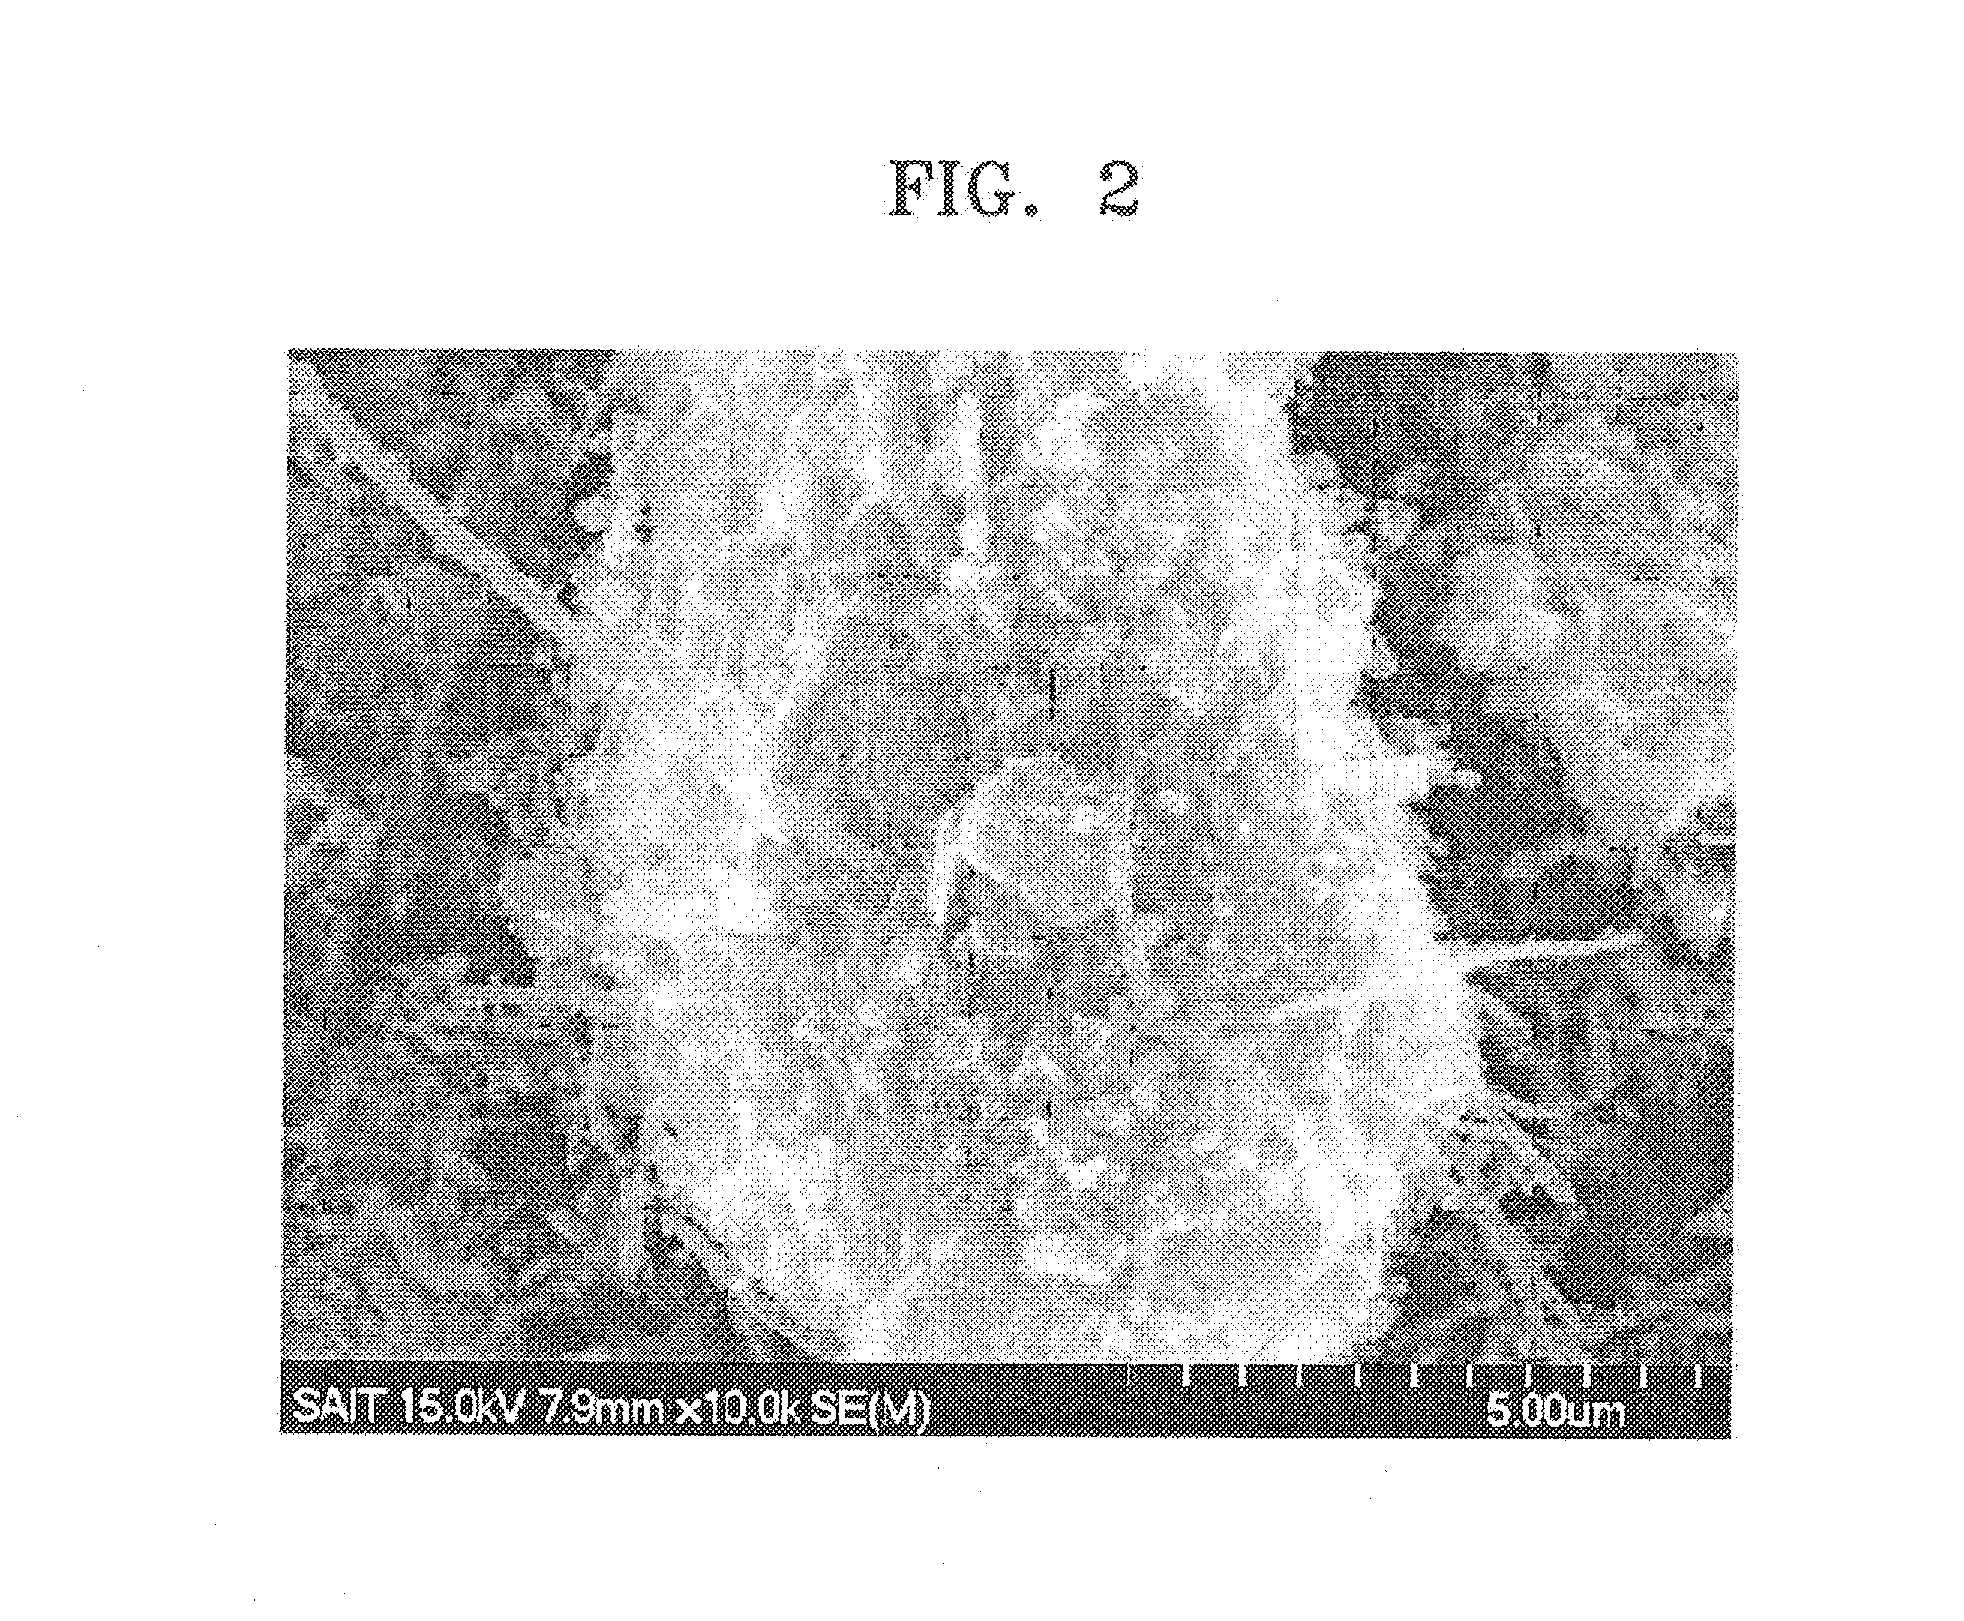 Porous anode active material, method of preparing the same, and anode and lithium battery employing the same